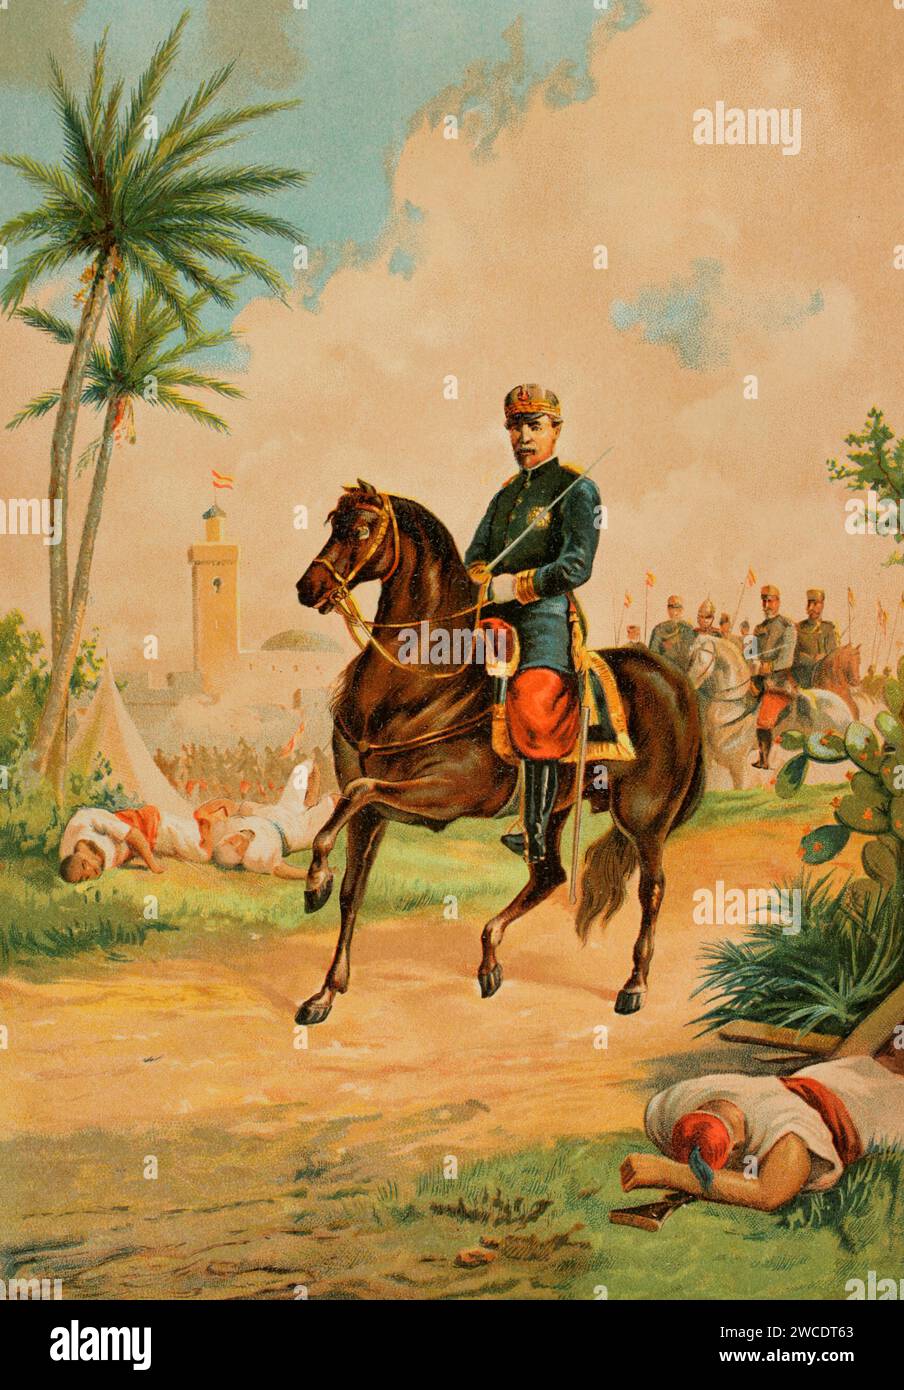 Leopoldo O'Donnell (1809-1867). Spanish military and politician. President of the Spanish government on several occasions after Espartero's Progressive Biennium (1854–1856). Equestrian portrait on the occasion of his participation in the Hispano-Moroccan War (1859-1860), taking command of his troops at the Battle of Tetuan on 4 February 1860. Chromolithography. "Historia Universal", by César Cantú. Volume X, 1881. Stock Photo